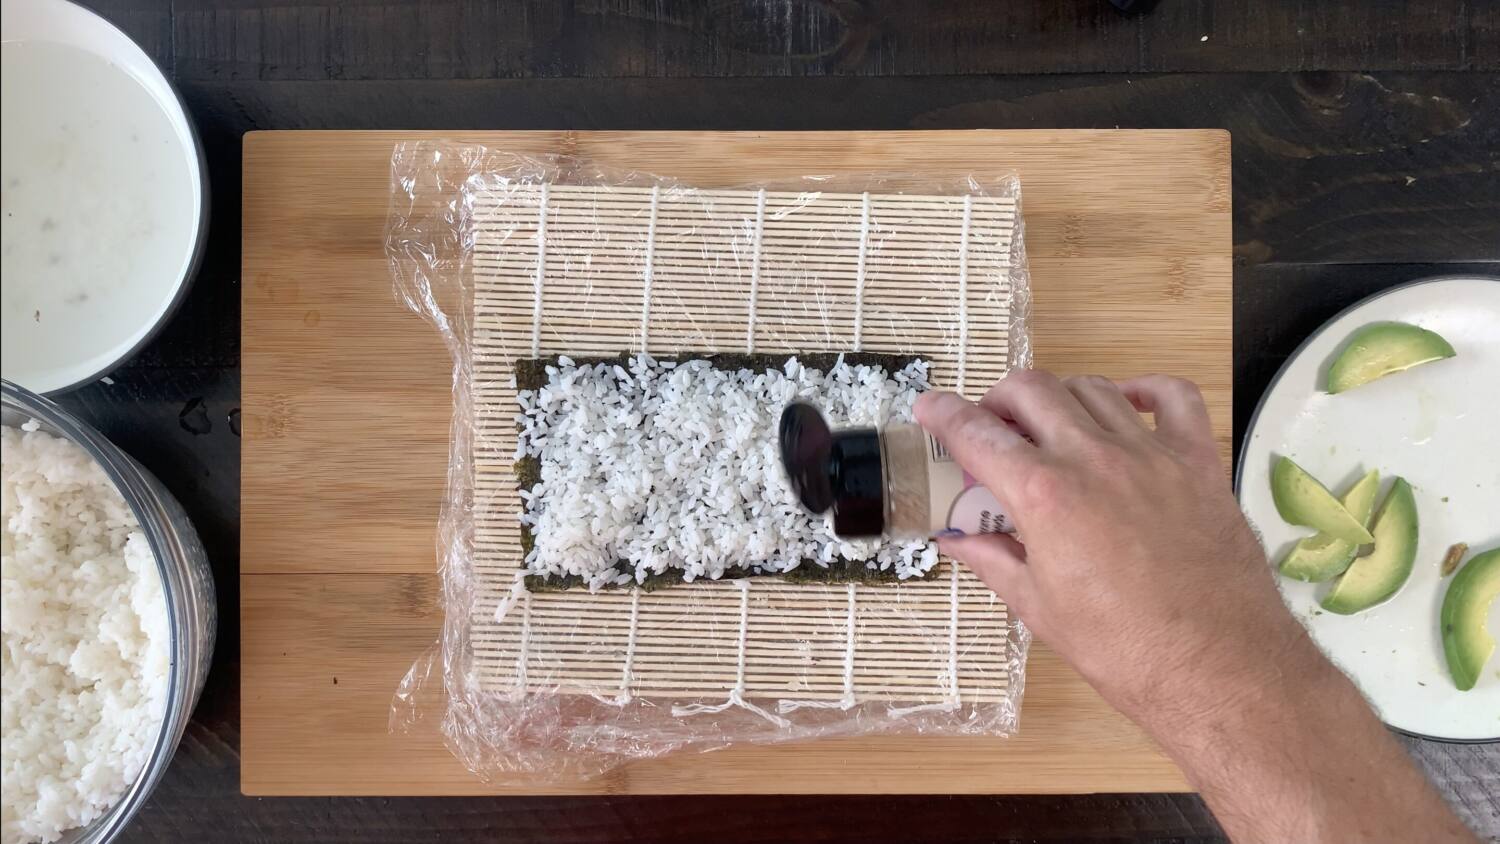 Spread the sesame seeds over the rice for the California roll